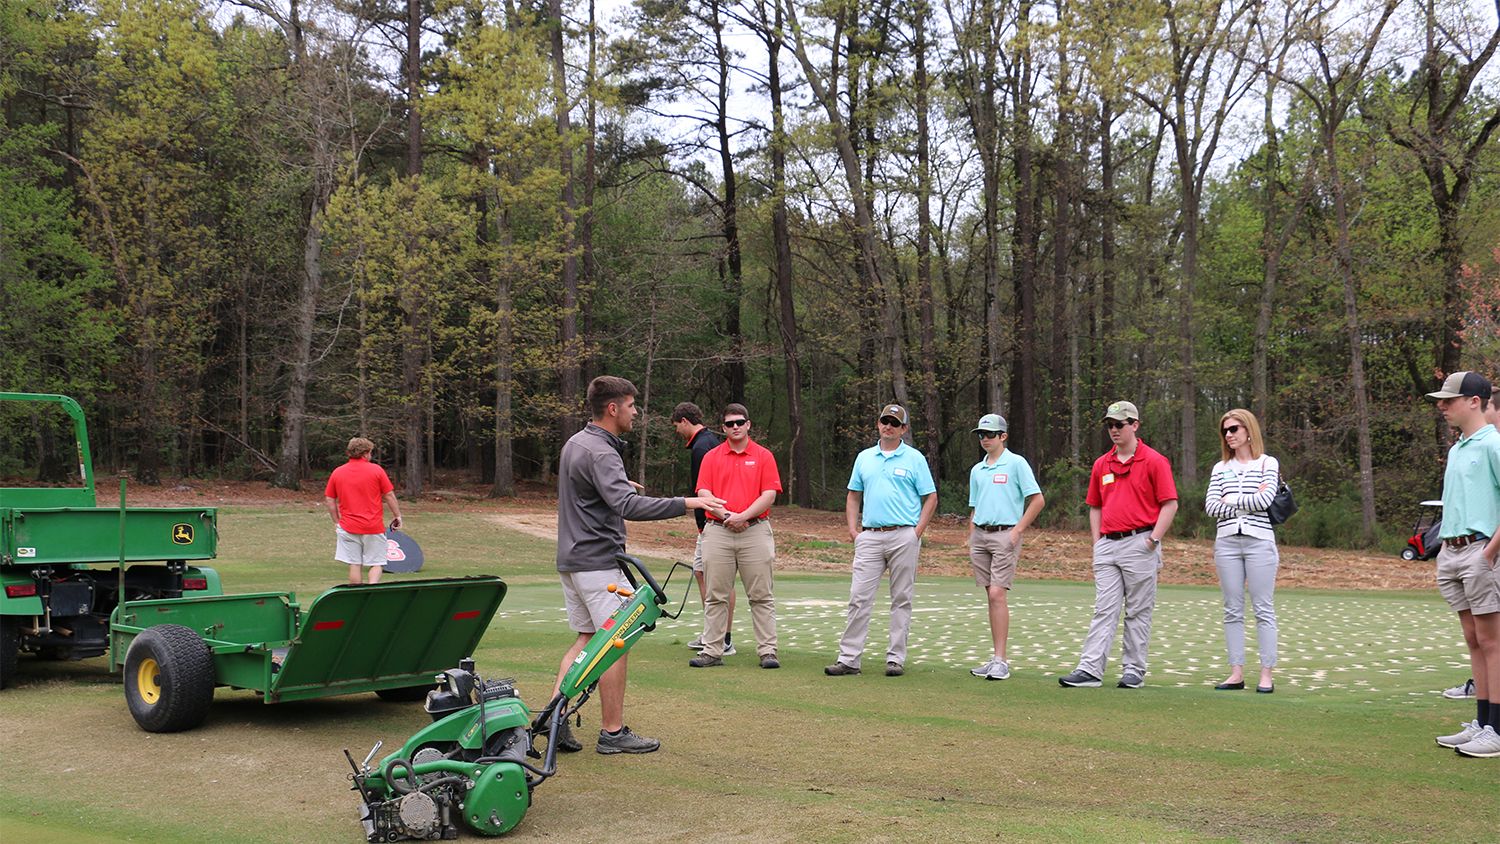 Golf course worker instructs students on equipment use